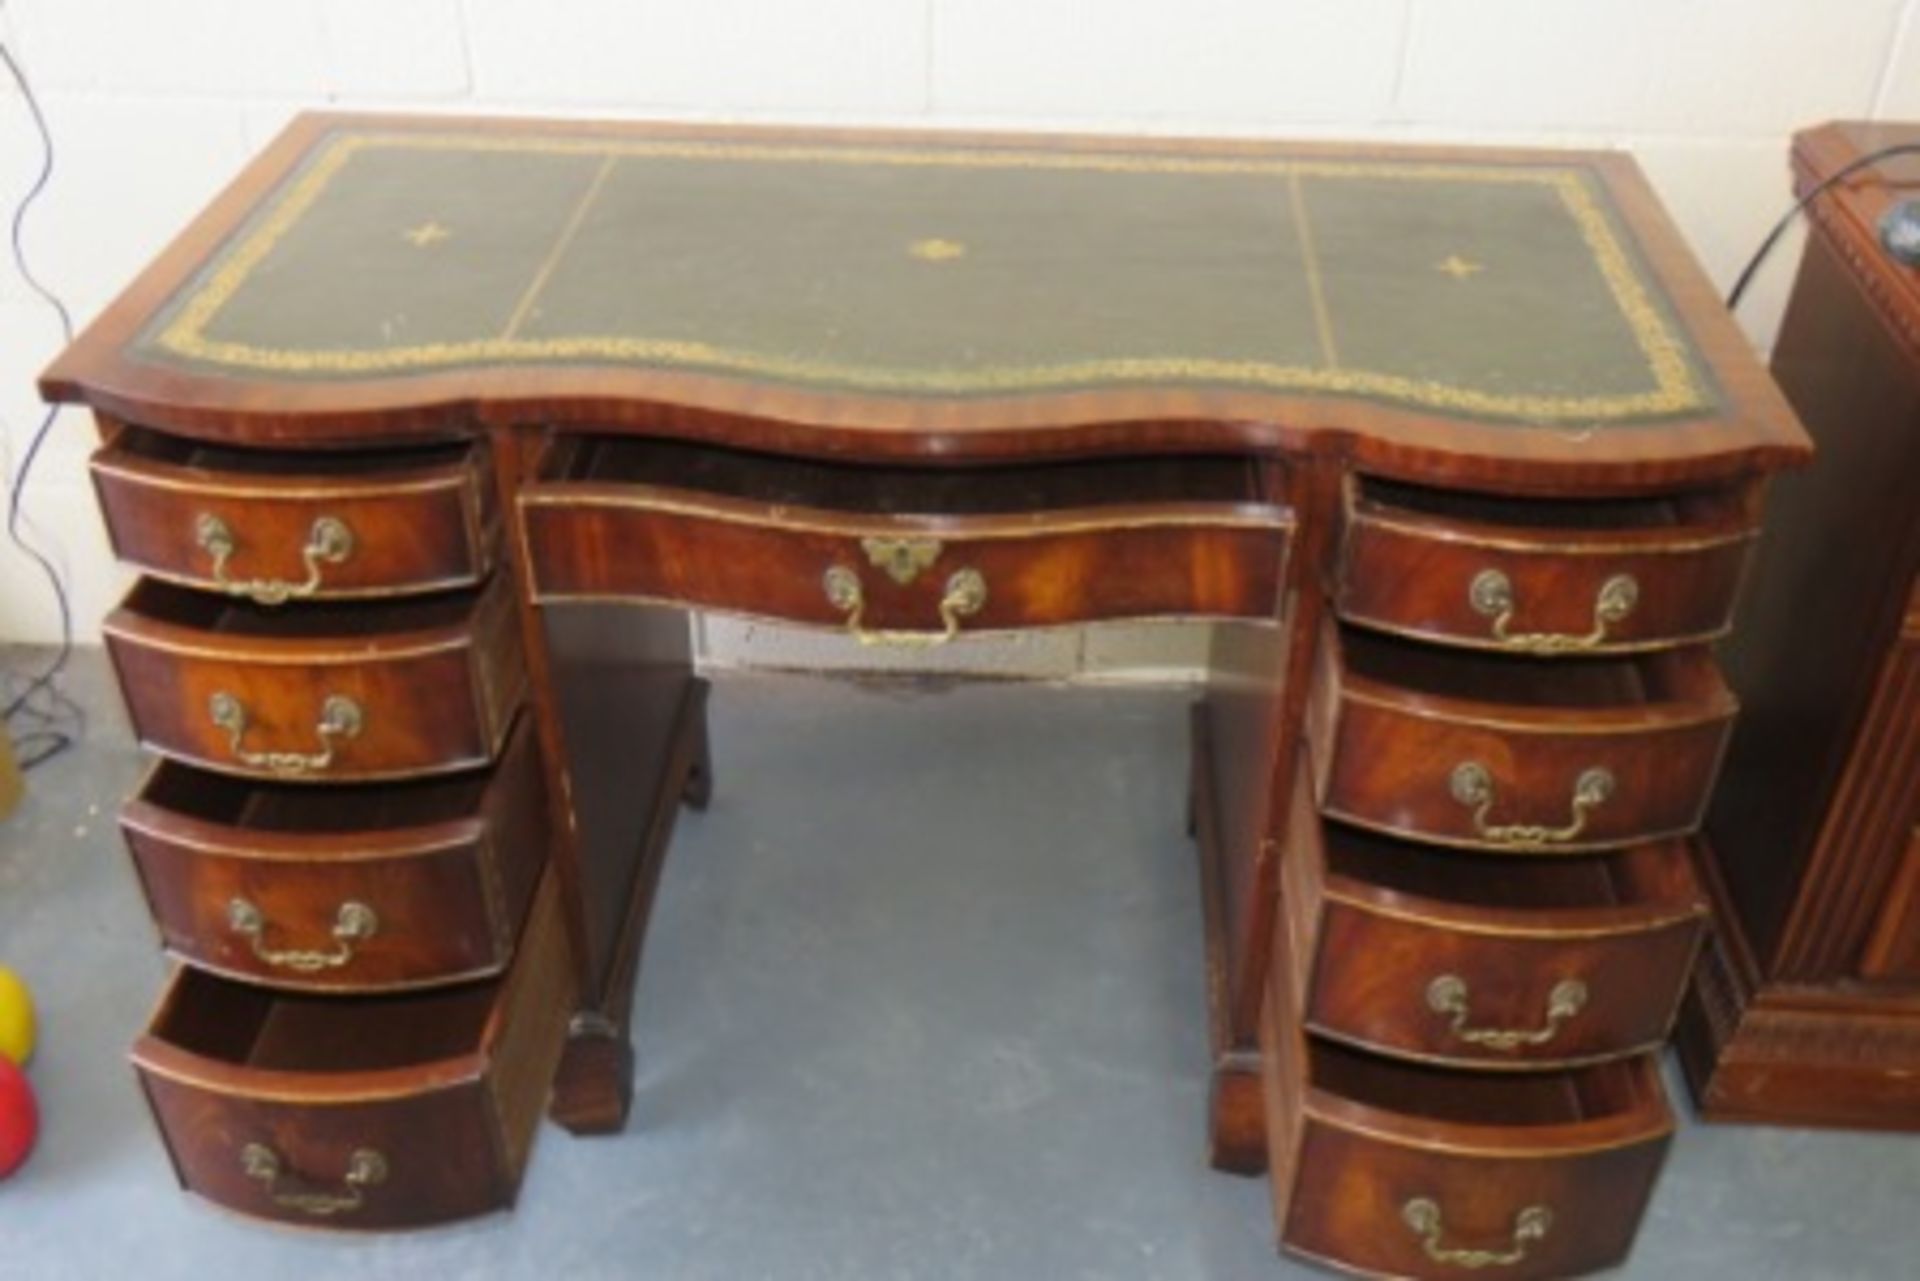 Antique Mahogany Leather Inlaid Desk With 9 Drawers - Image 2 of 3